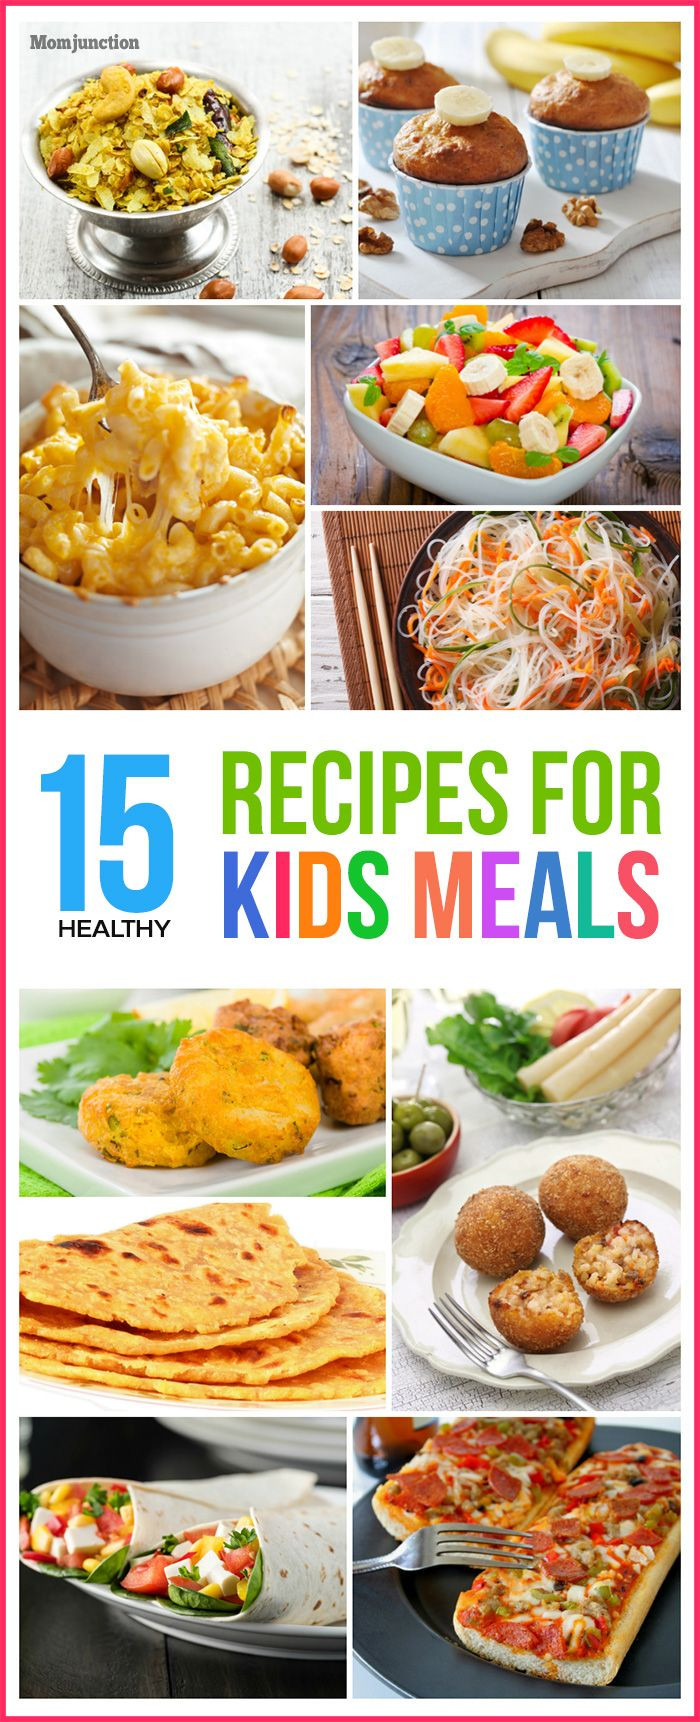 Recipes For Kids Dinner
 Top 15 Healthy Recipes For Kids Meals